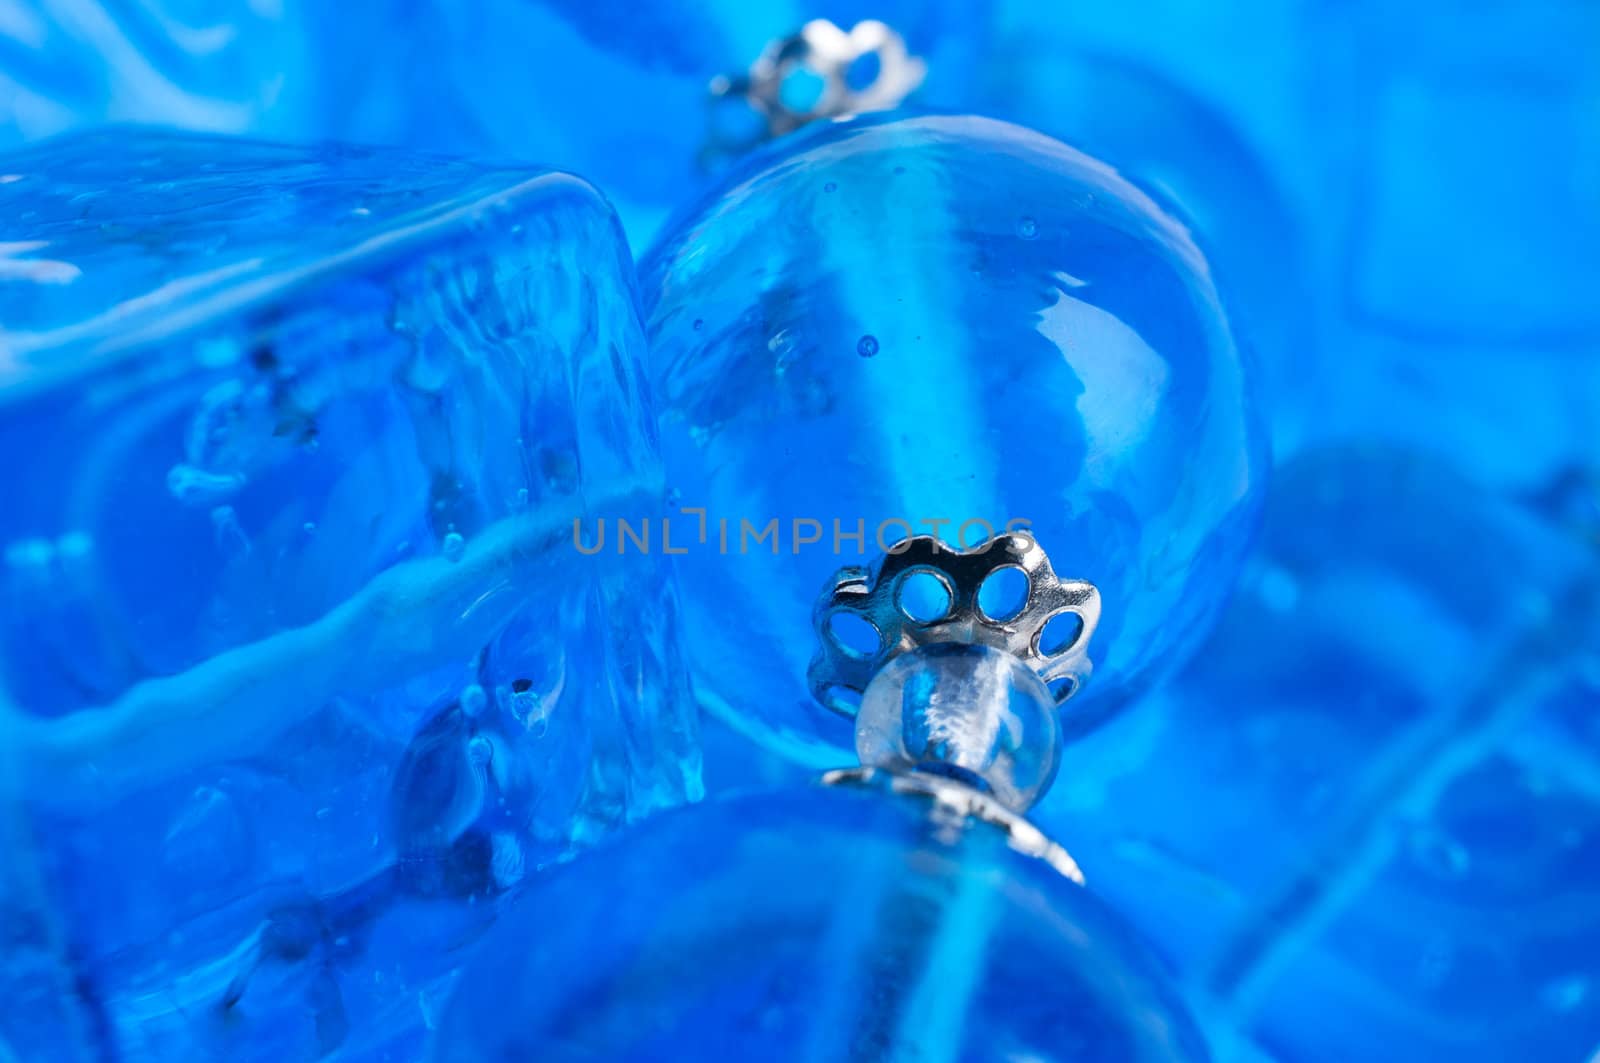 Blue glass beads background close up